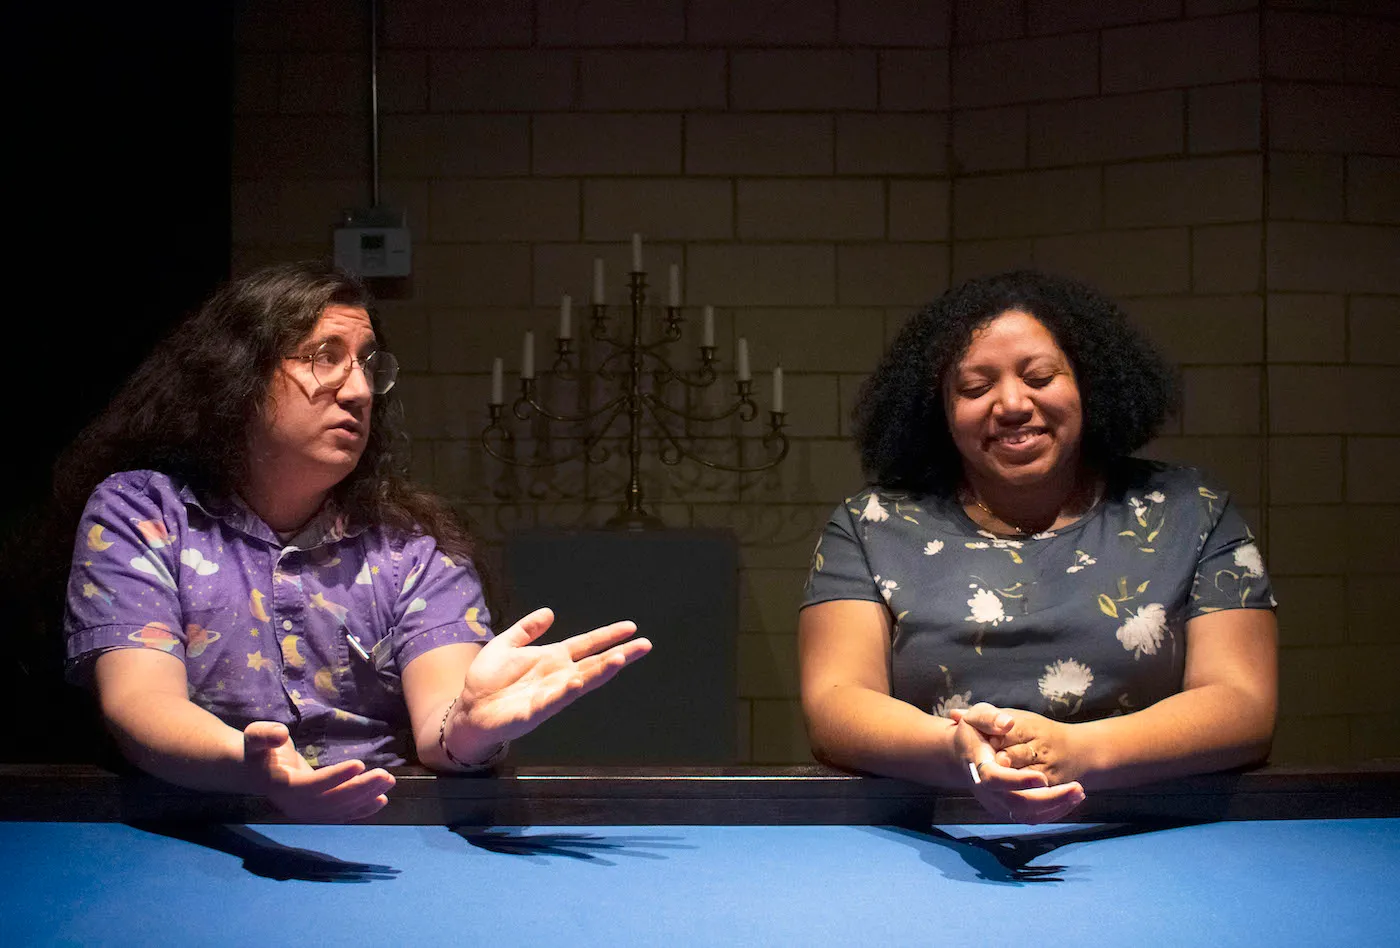 Two people sit in front of a blue table under harsh lighting. One person is raising their arms to explain something, the other has their hands clasped and is smiling.